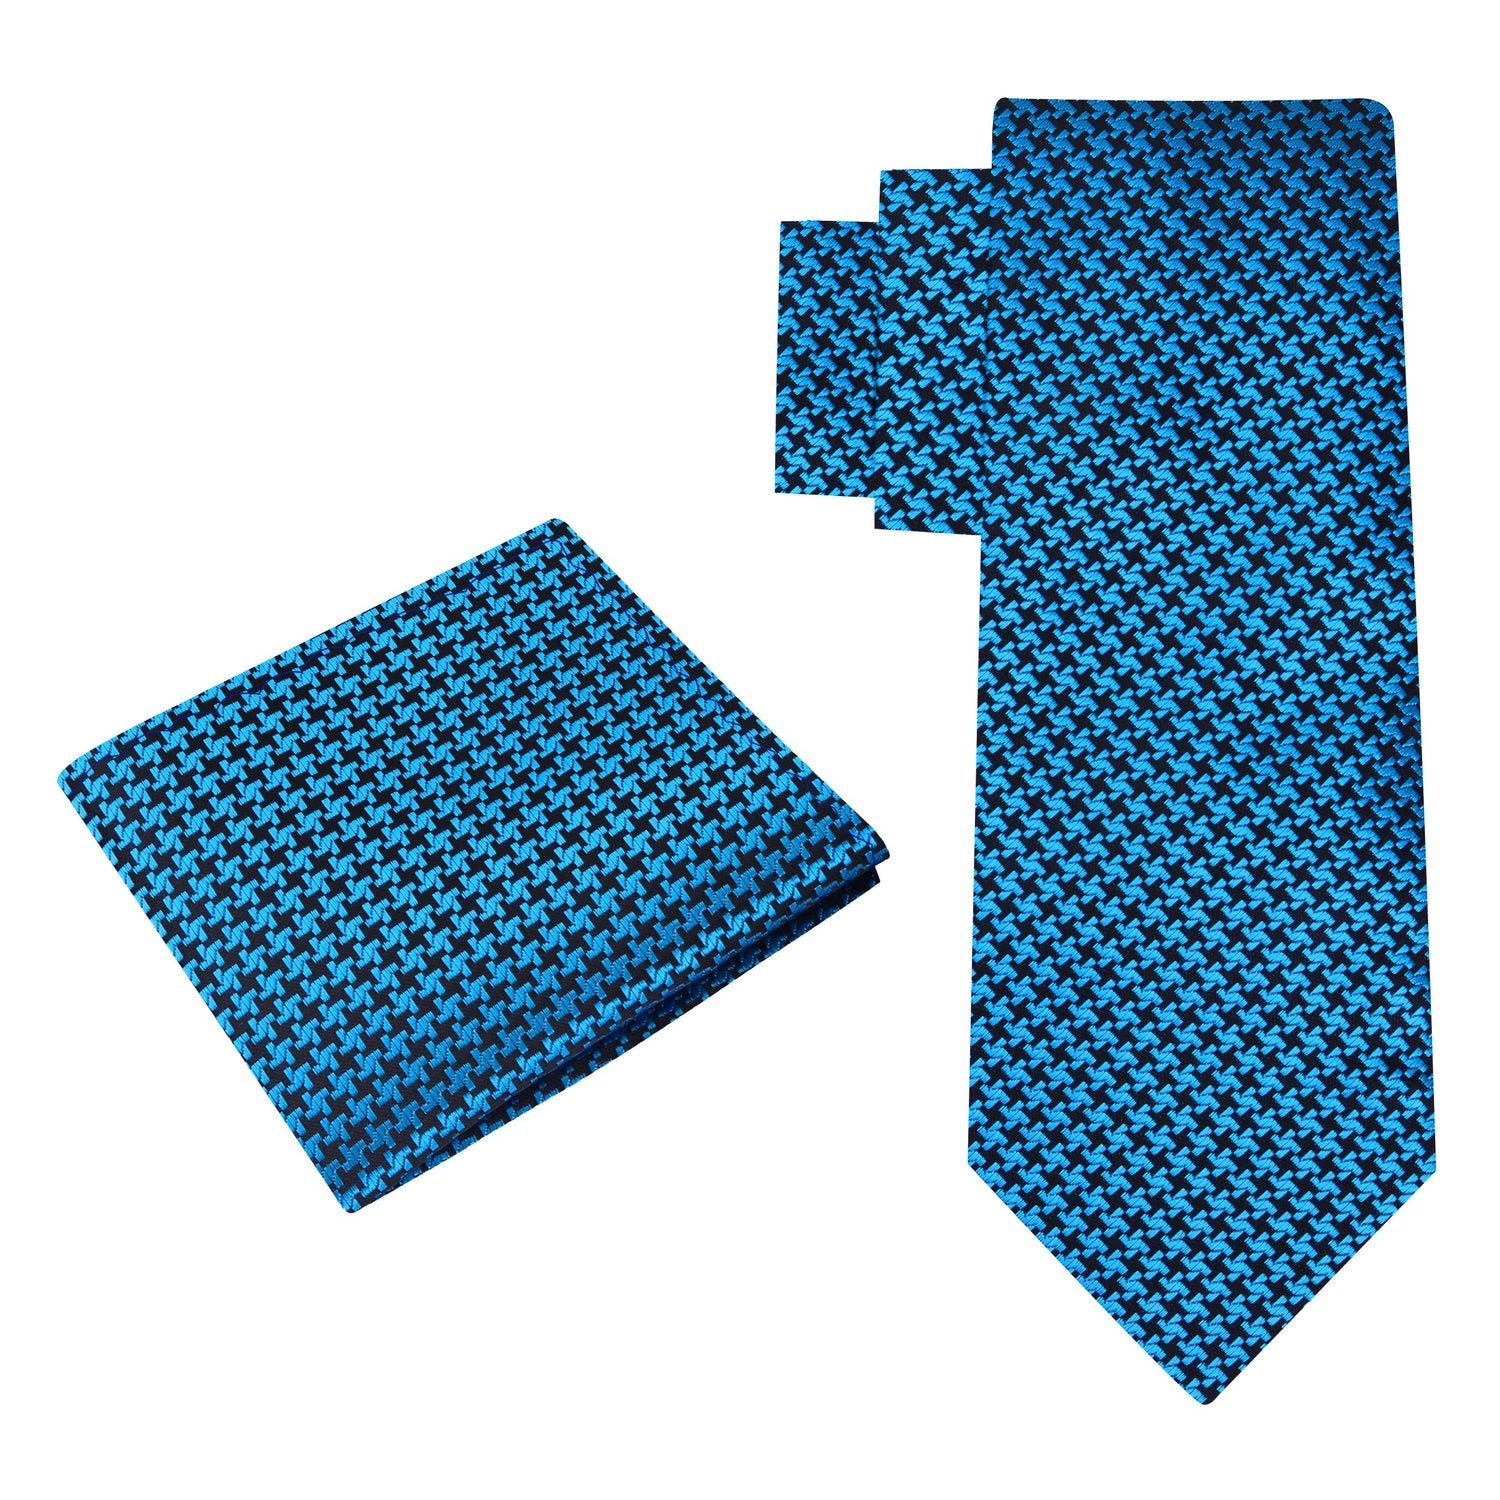 Alt View: Teal, Black Hounds Tooth Tie and Square